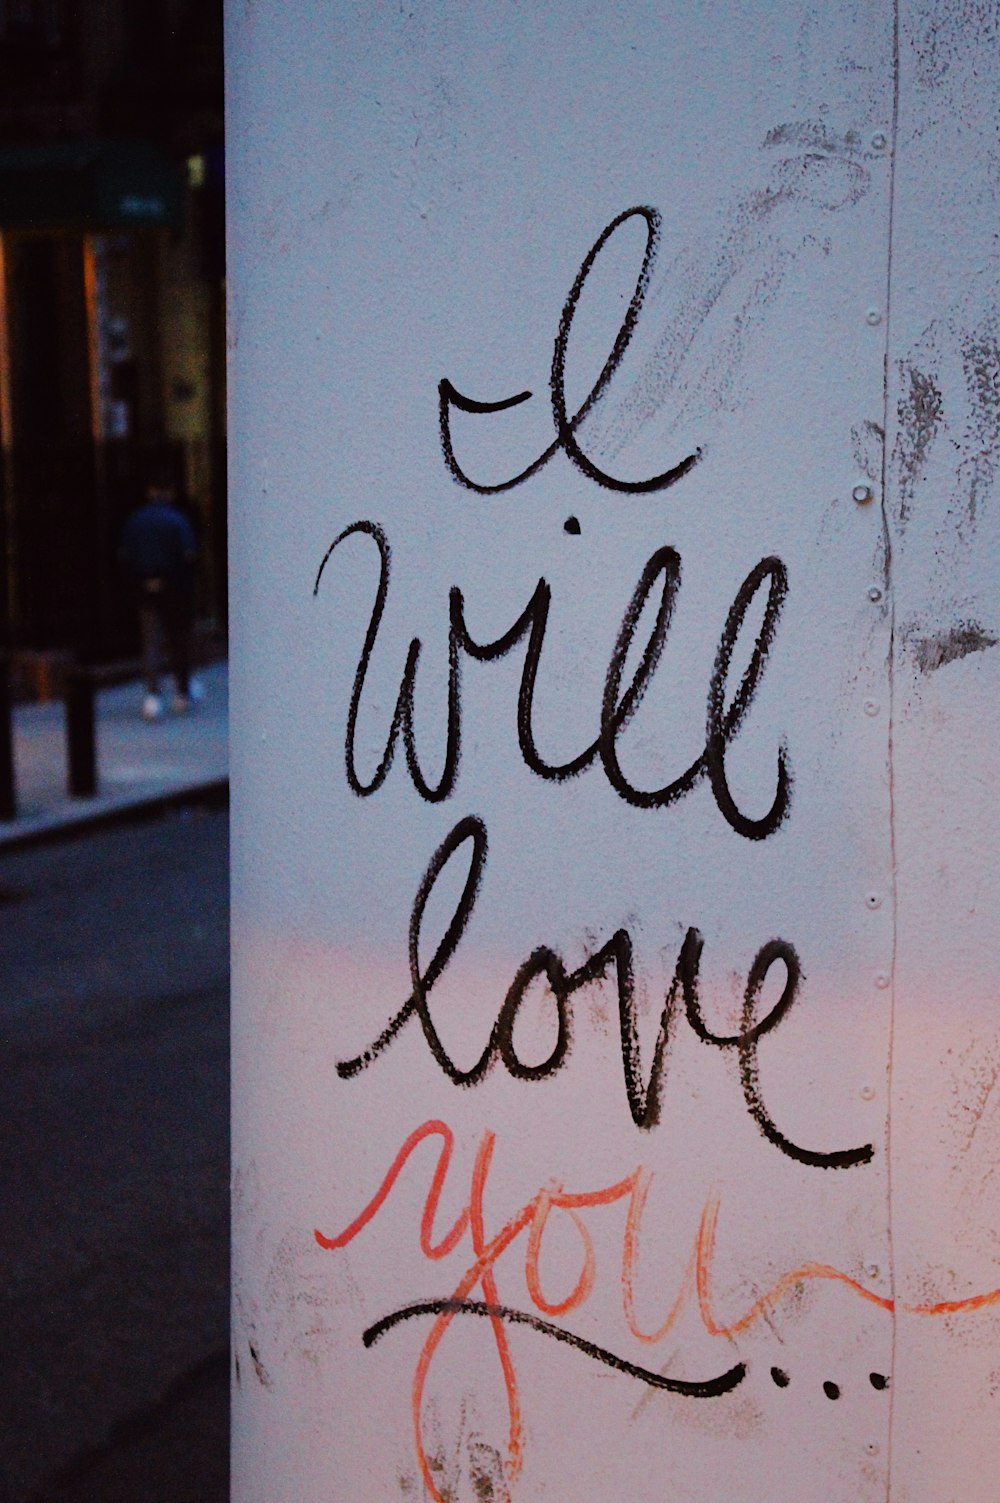 I will love you written on wall